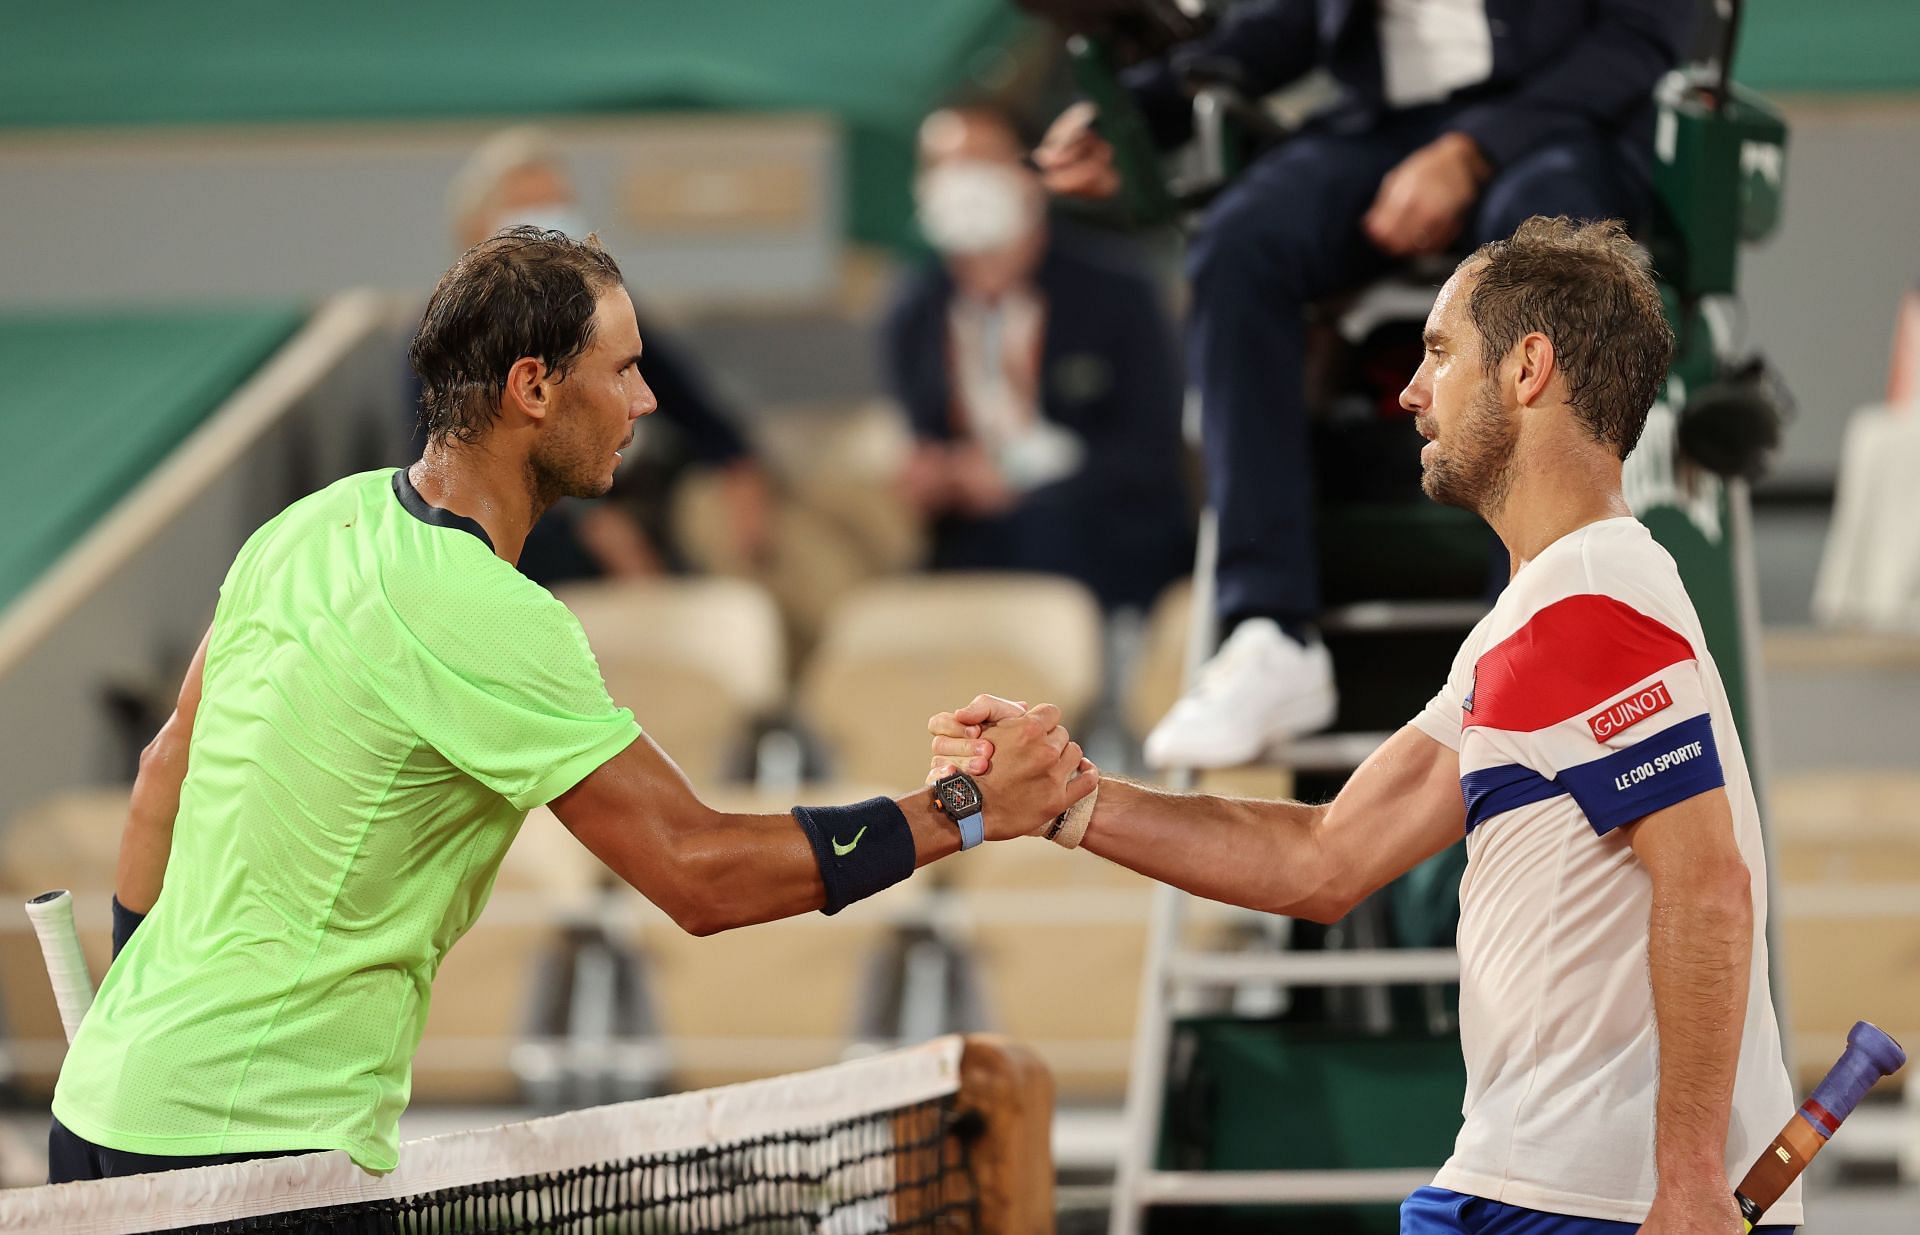 Rafael Nadal and Richard Gasquet at the 2021 French Open.